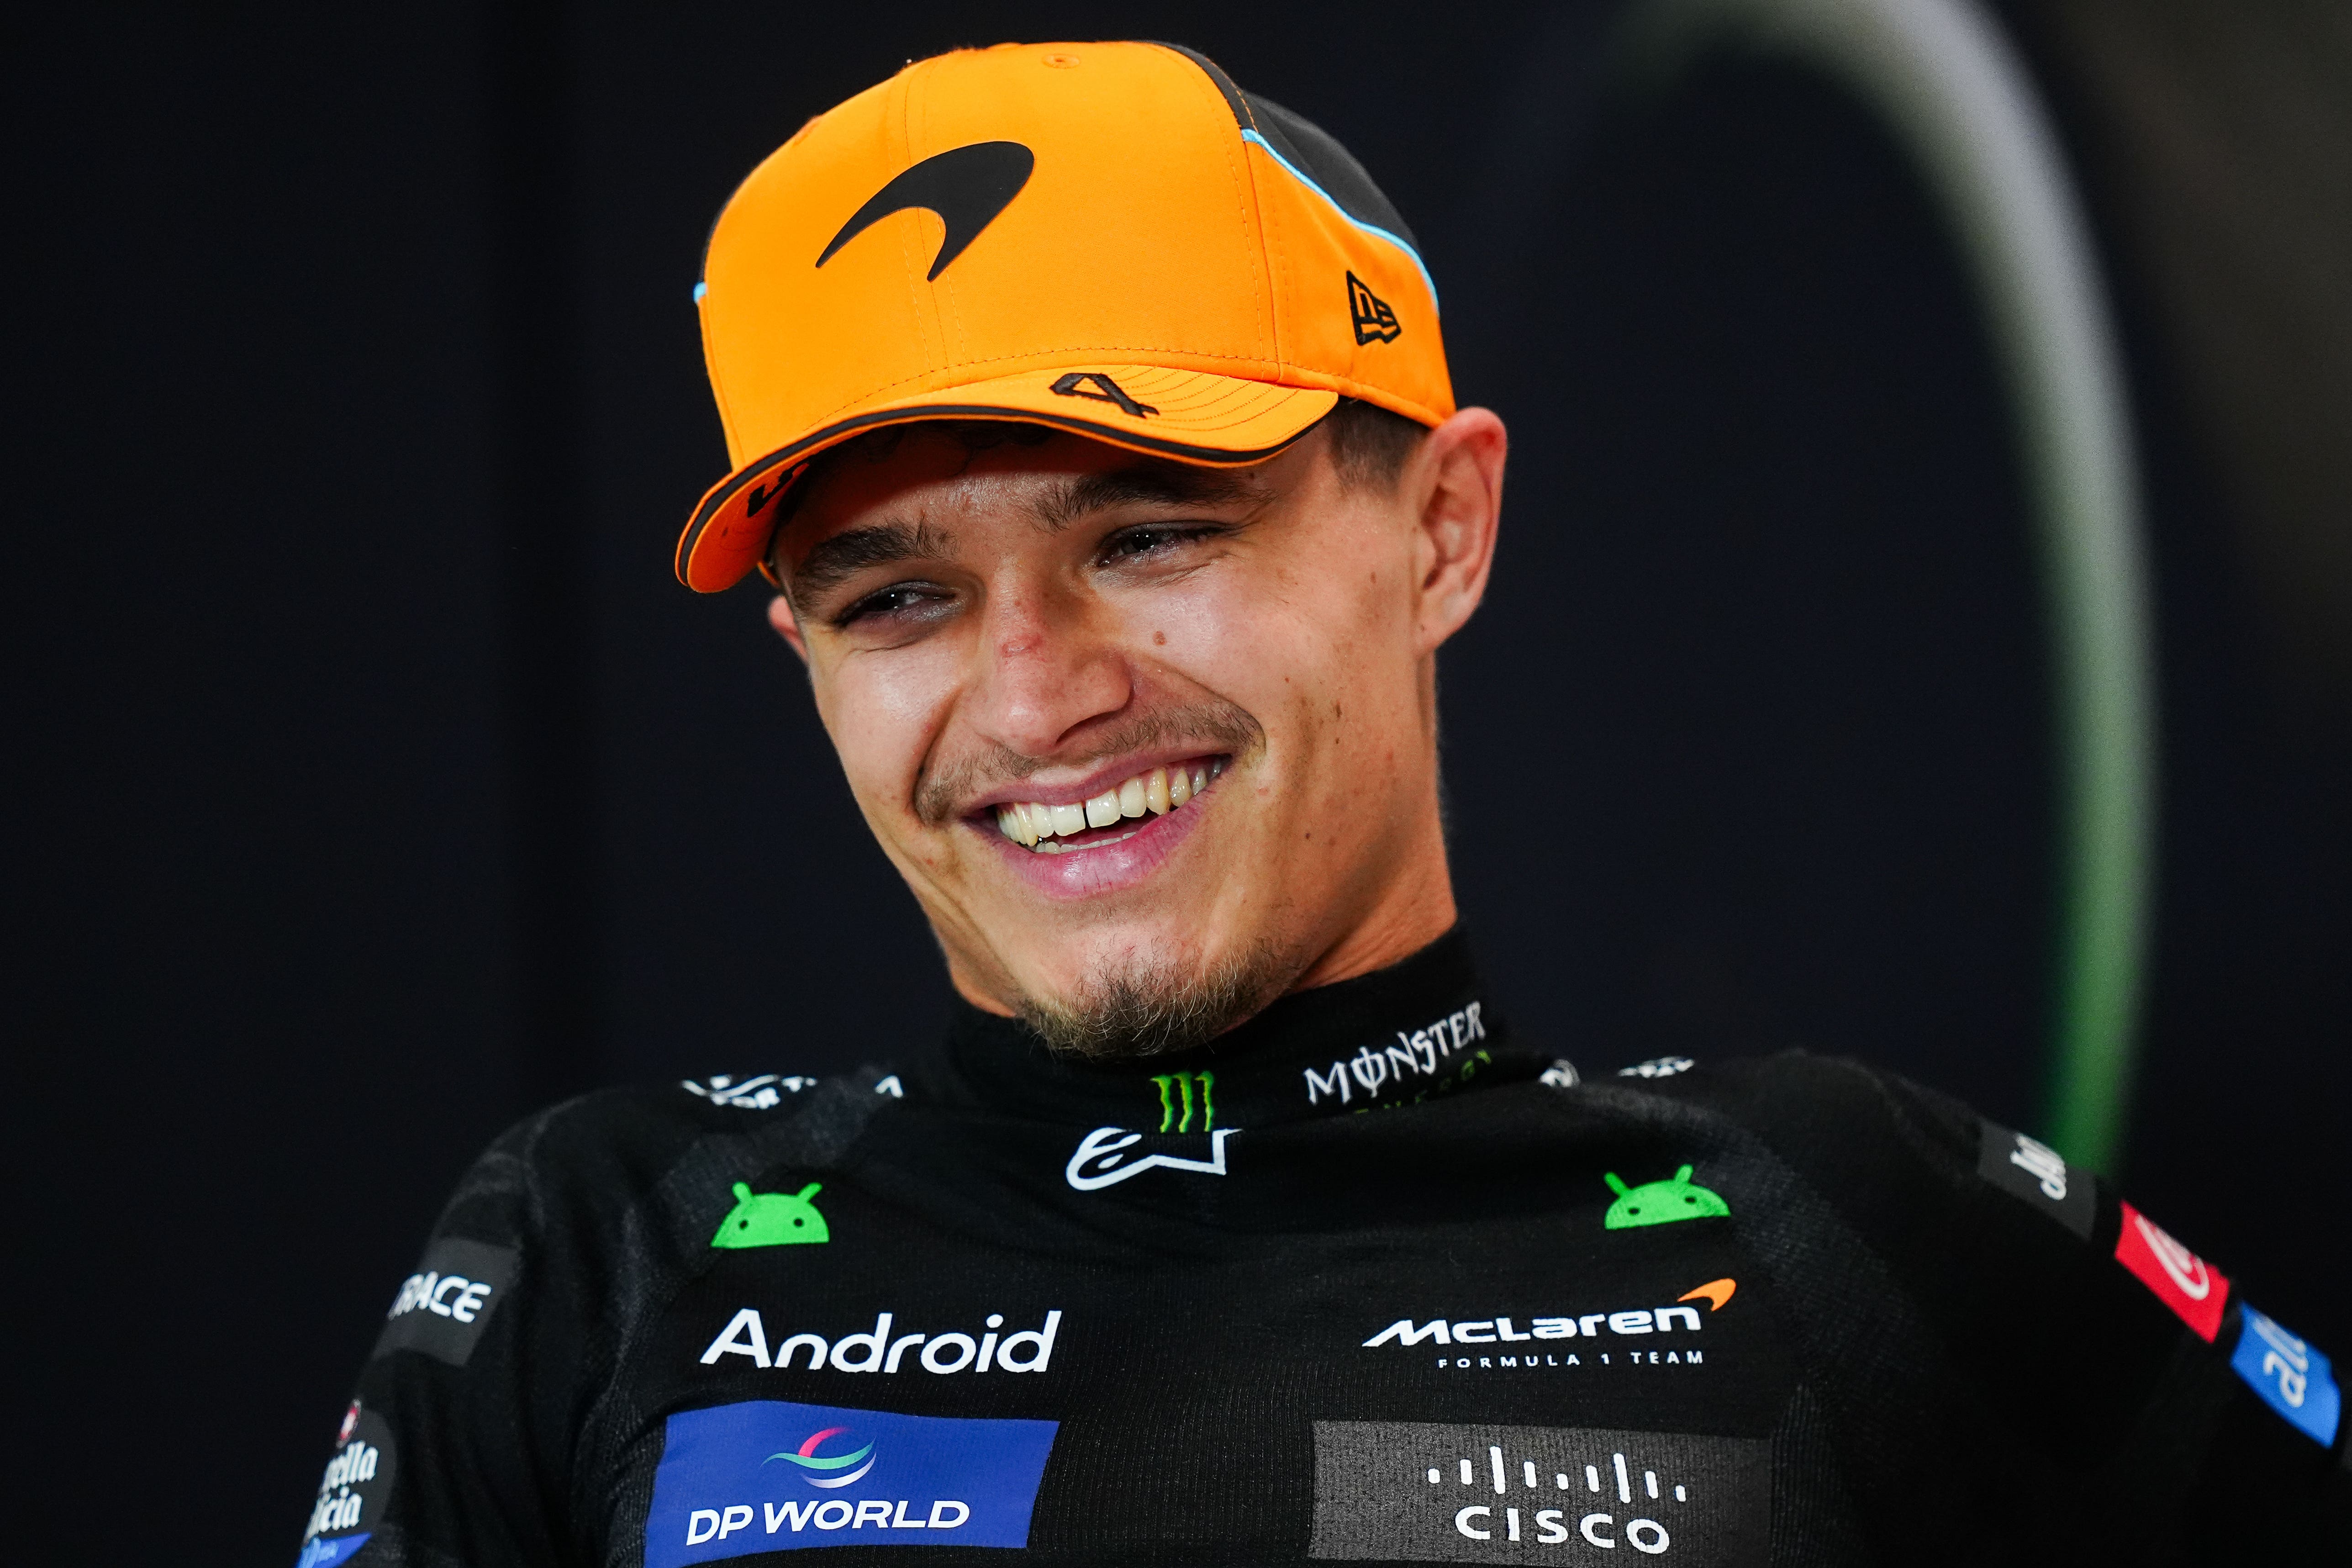 Lando Norris is now competing at the front on a regular basis